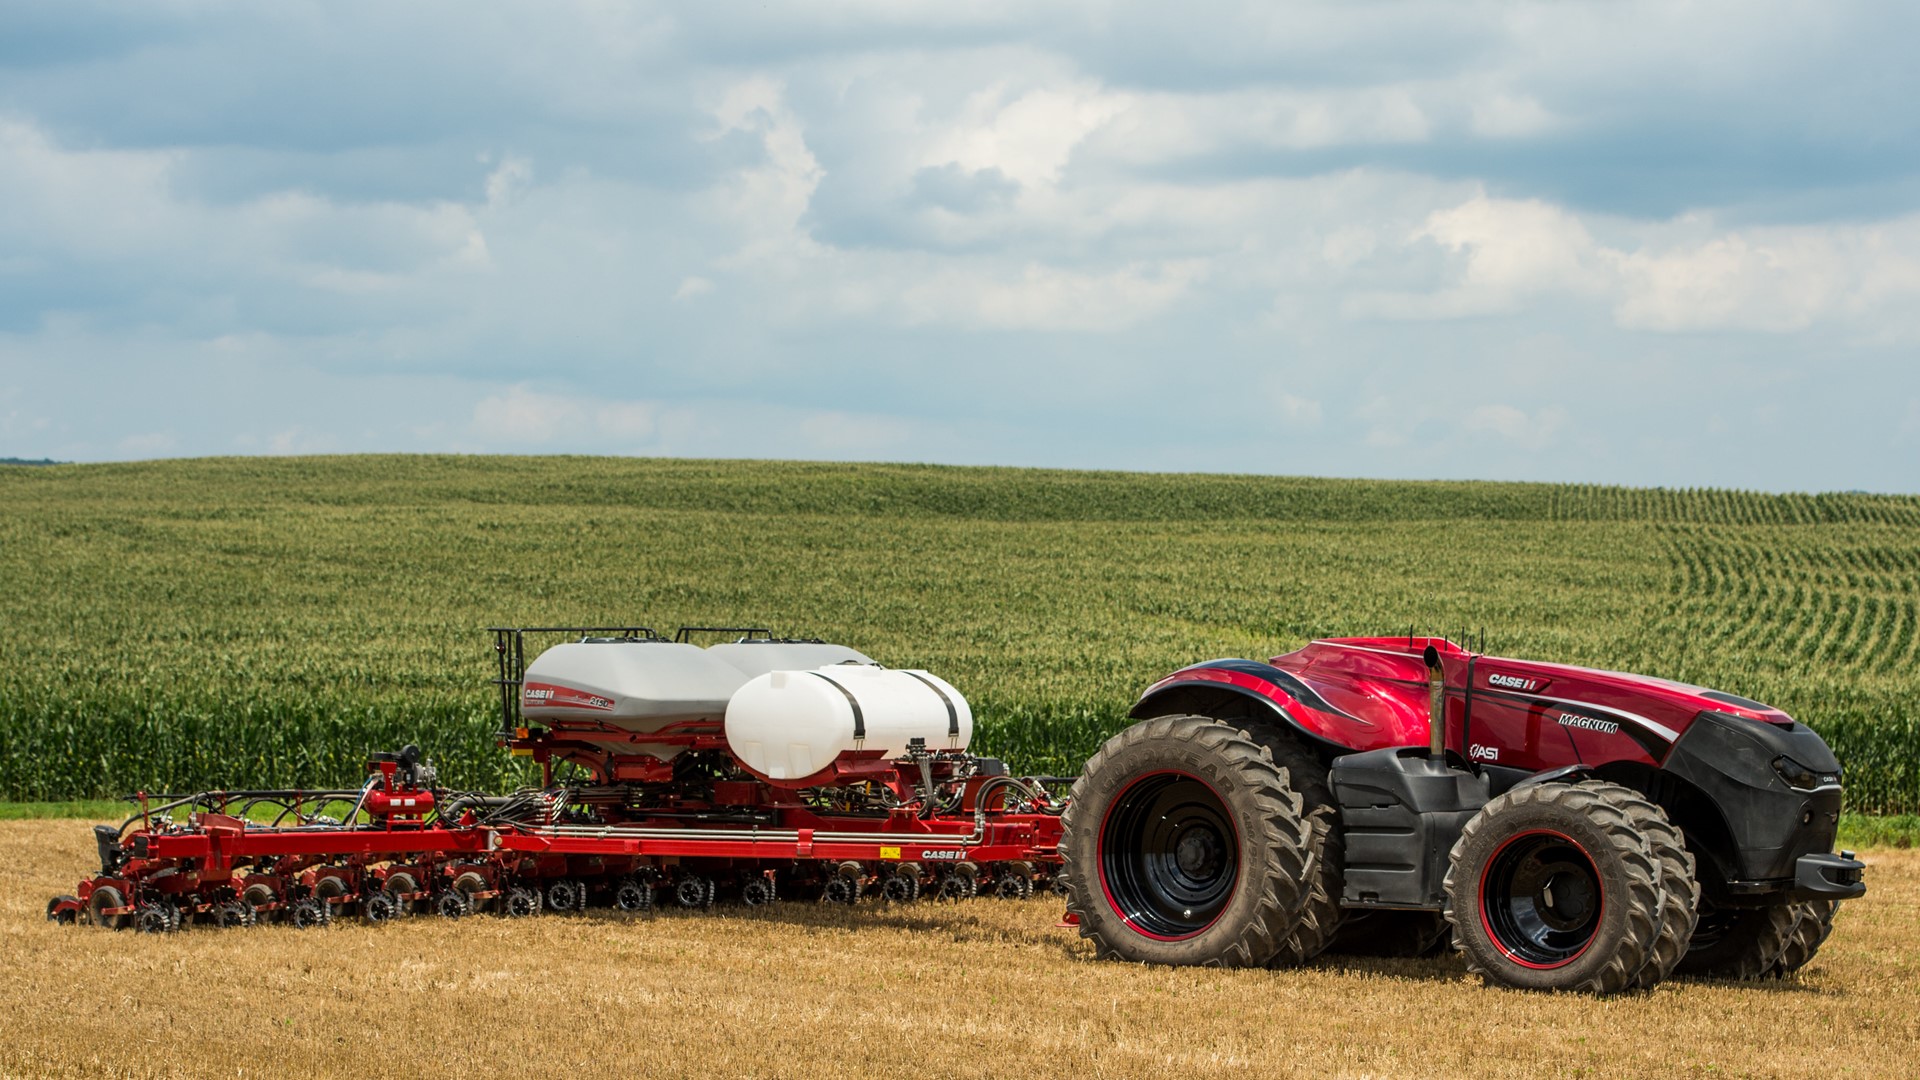 Case IH Magnum Autonomous Concept Tractor in the field with the Case IH Early Riser 2150 Planter